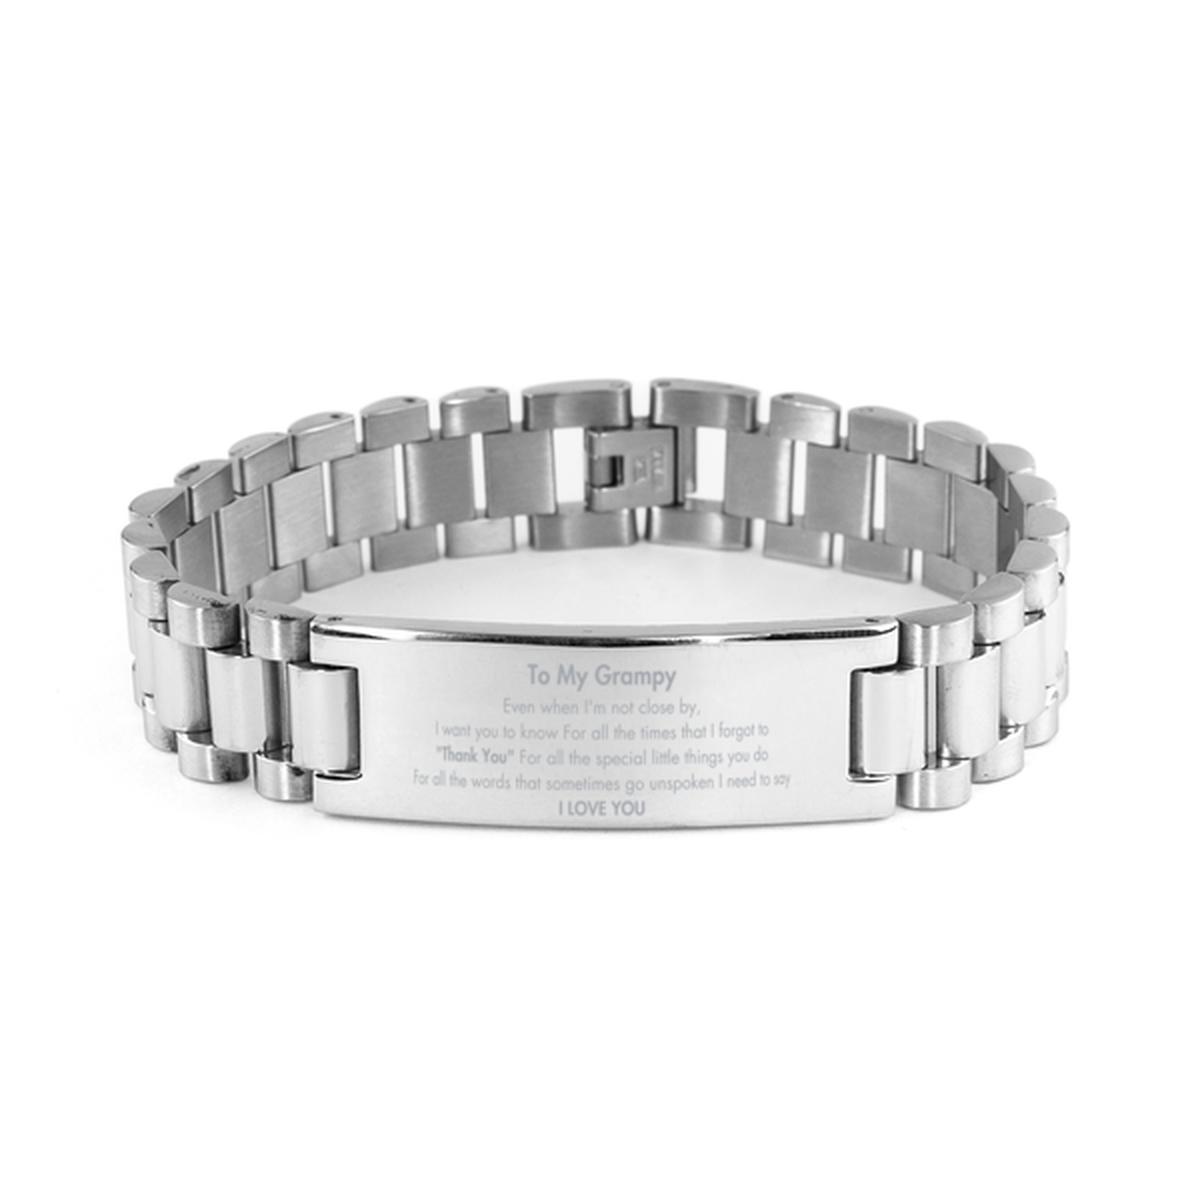 Thank You Gifts for Grampy, Keepsake Ladder Stainless Steel Bracelet Gifts for Grampy Birthday Mother's day Father's Day Grampy For all the words That sometimes go unspoken I need to say I LOVE YOU